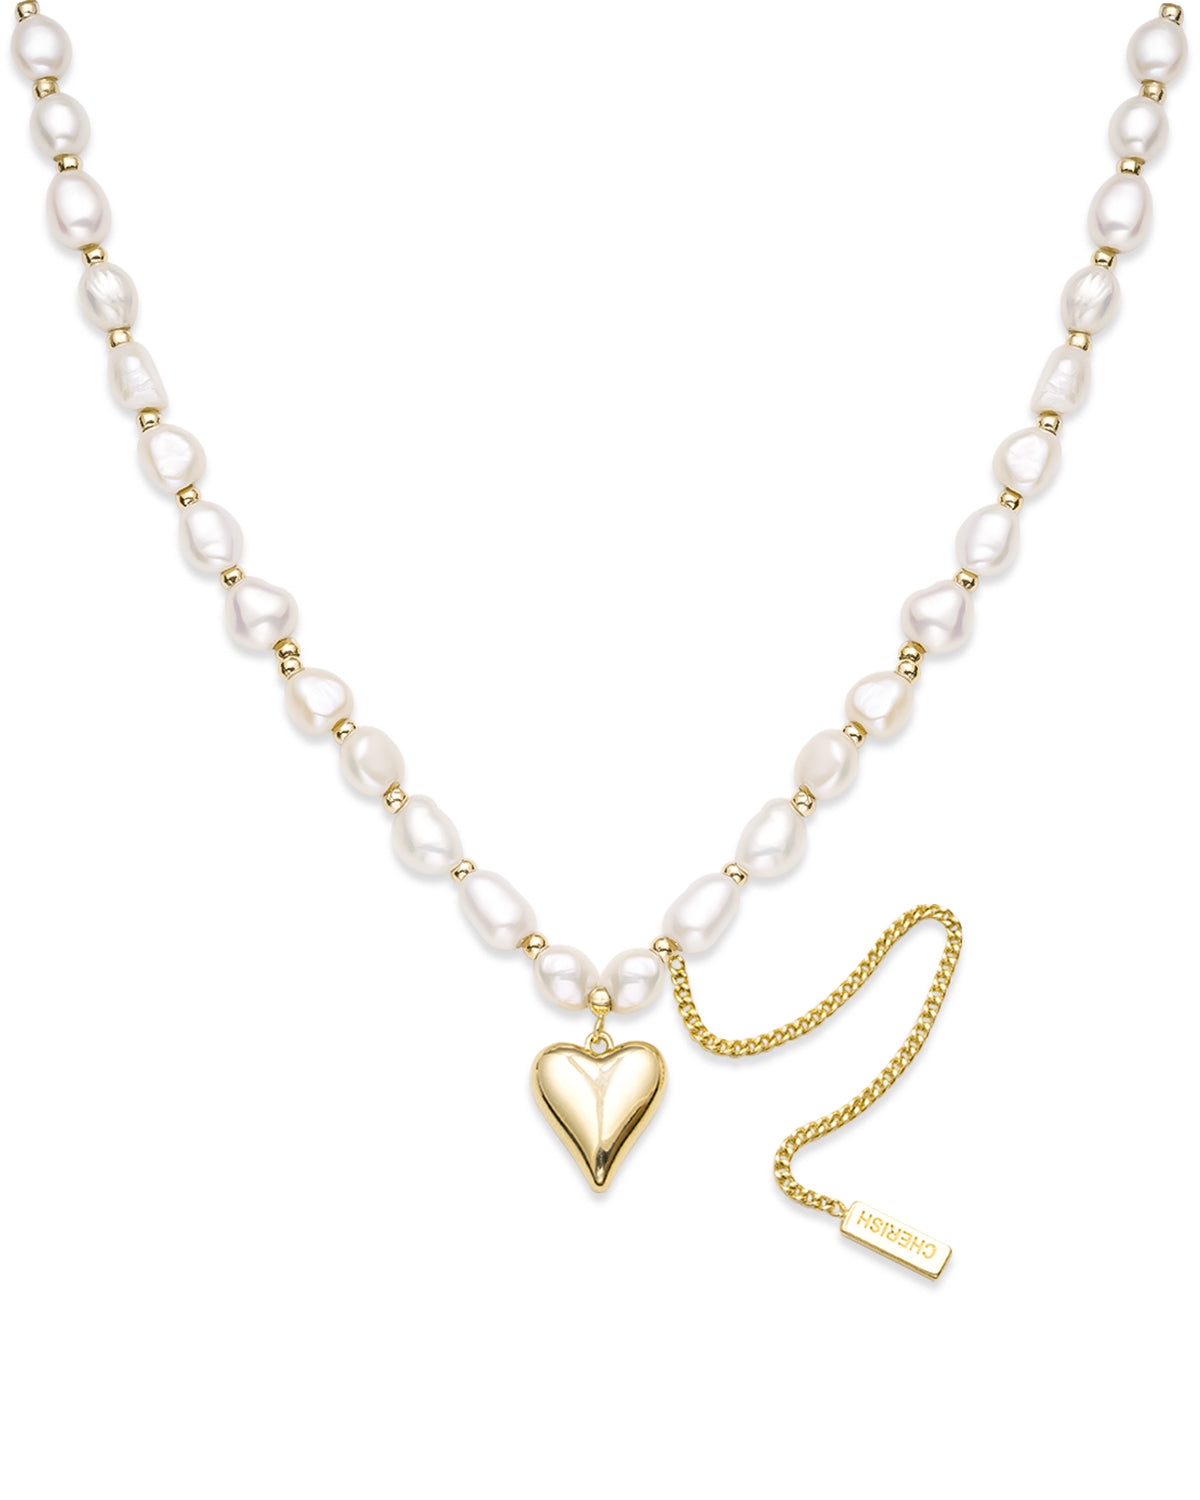 5-6mm White Freshwater Pearl Golden Heart Necklace